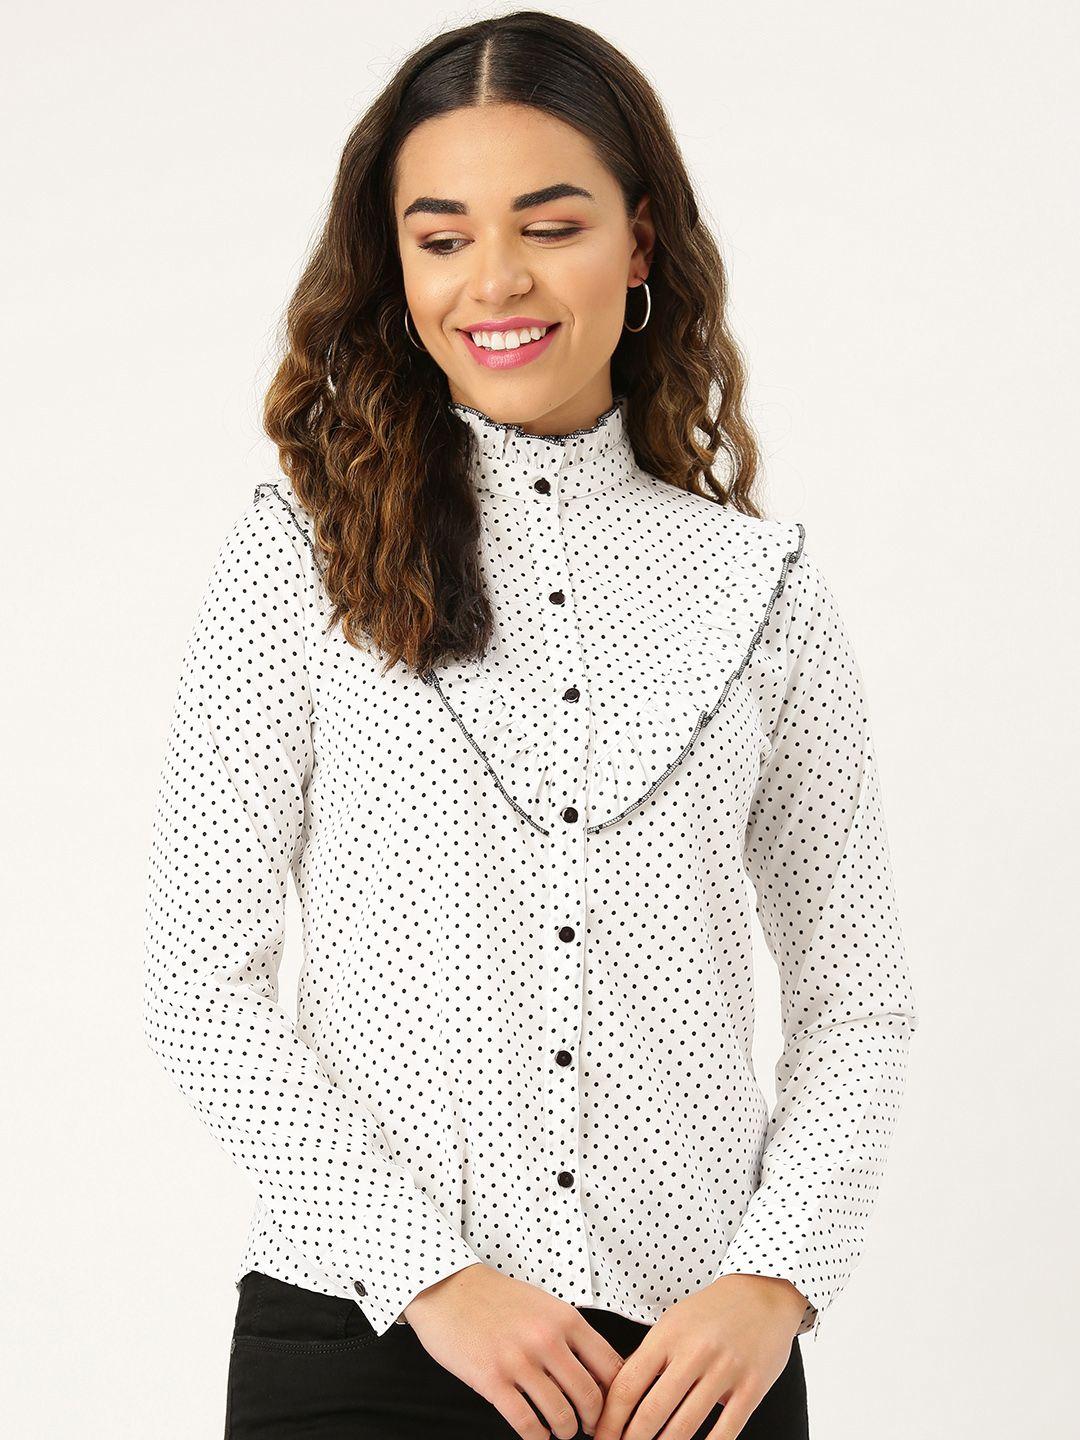 style quotient women white & black victorian style polka dot print casual shirt